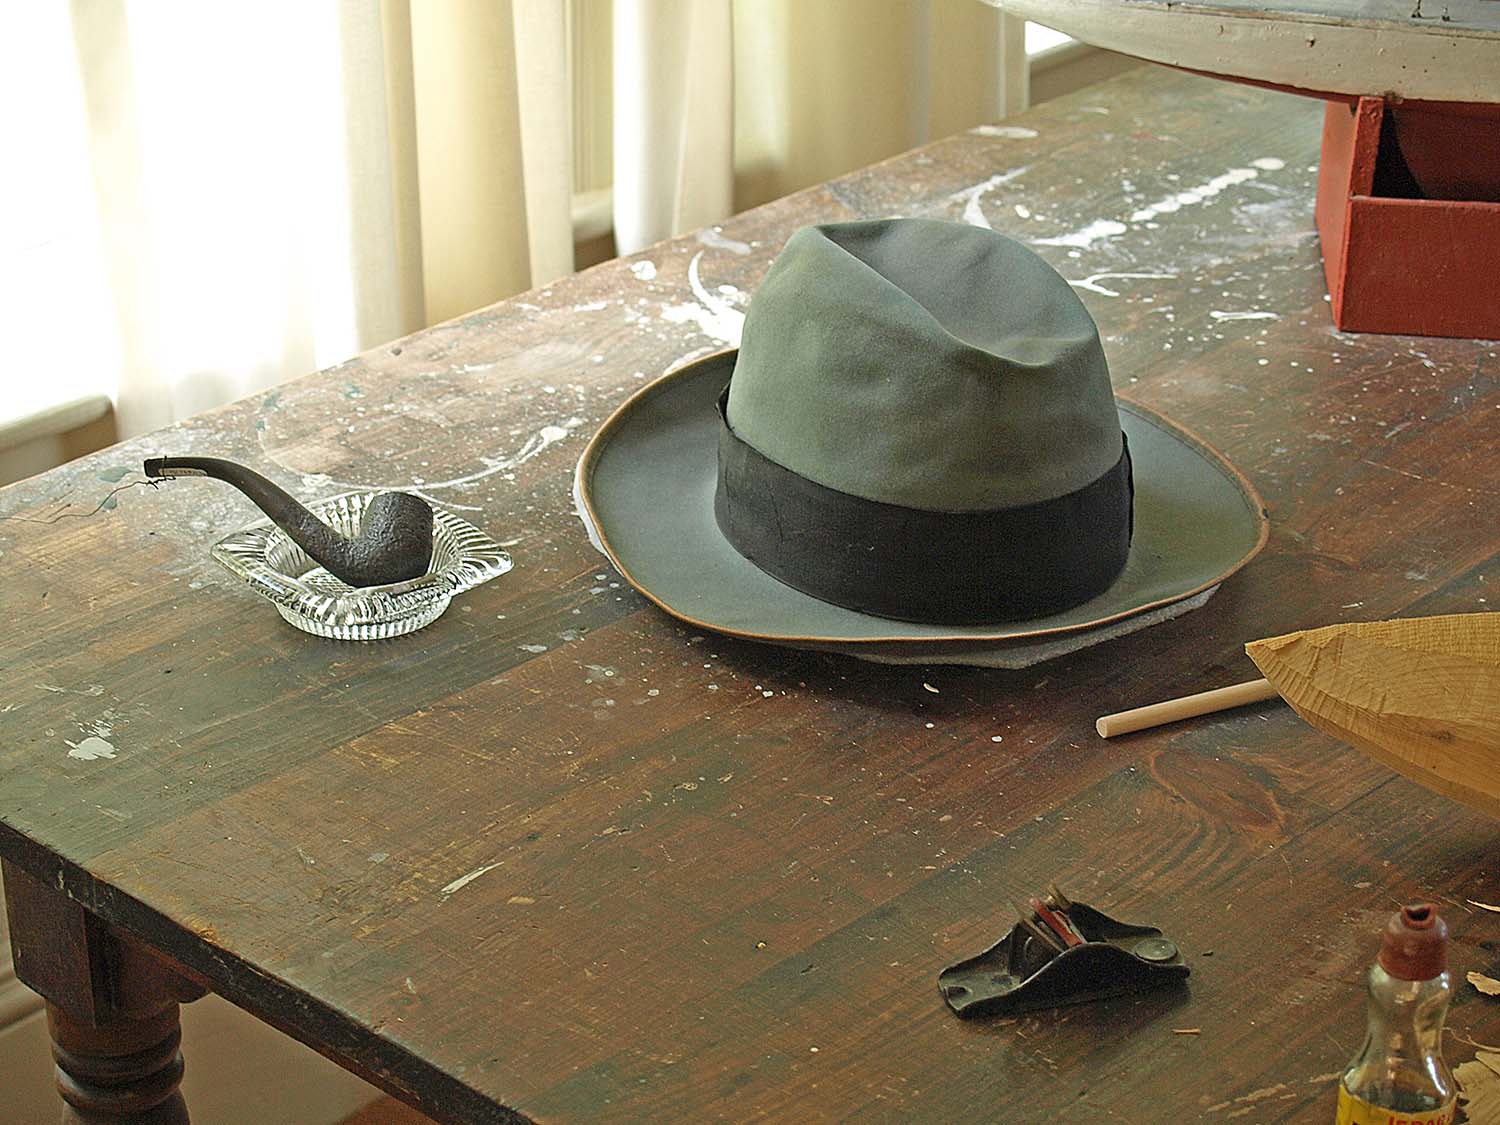 FDR’s hat and pipe on a table in the Roosevelt Cottage on Campobello Island.